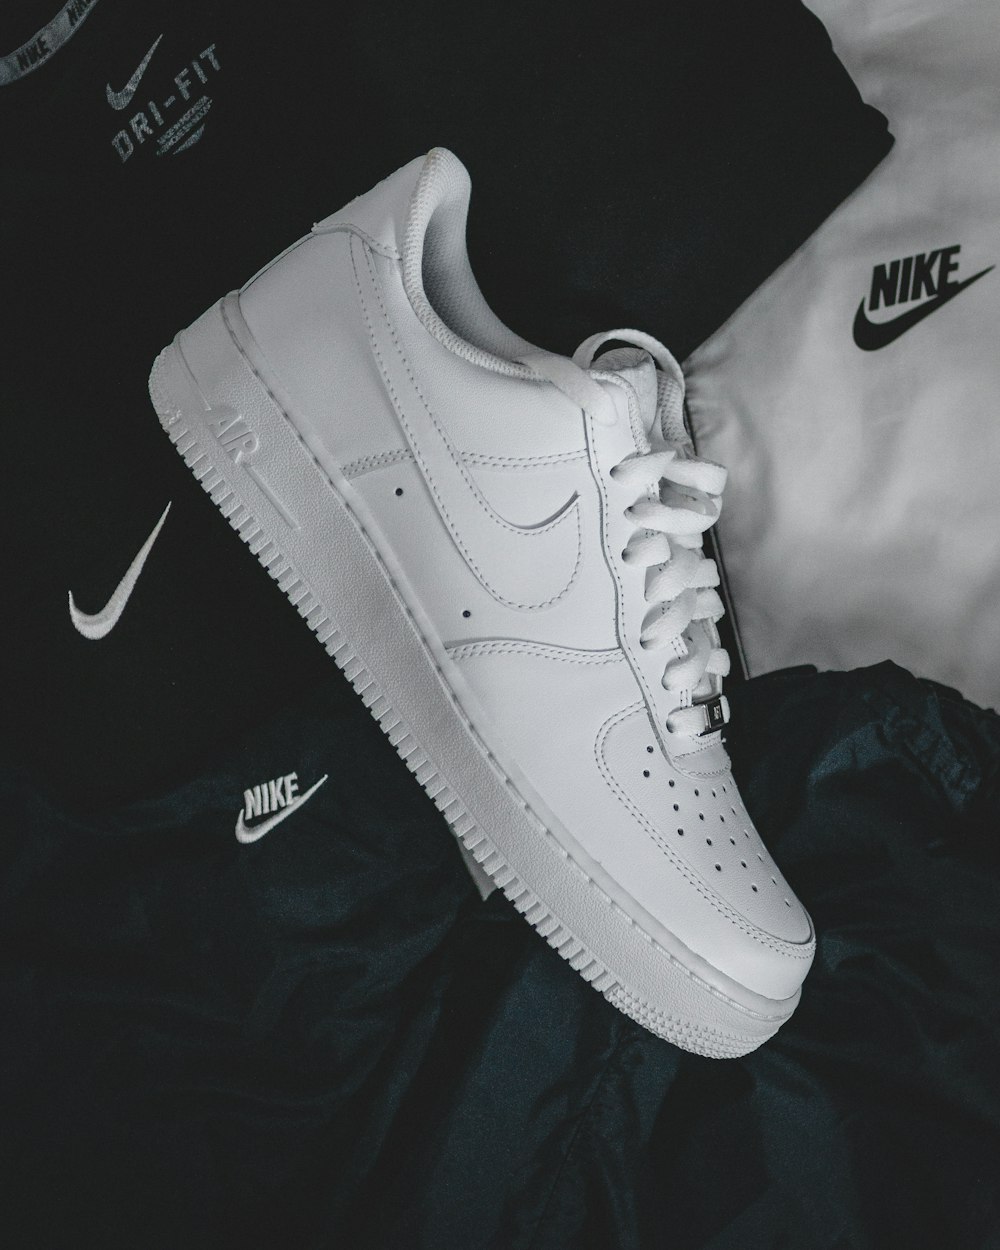 Nike Air Pictures | Download Free Images on Unsplash